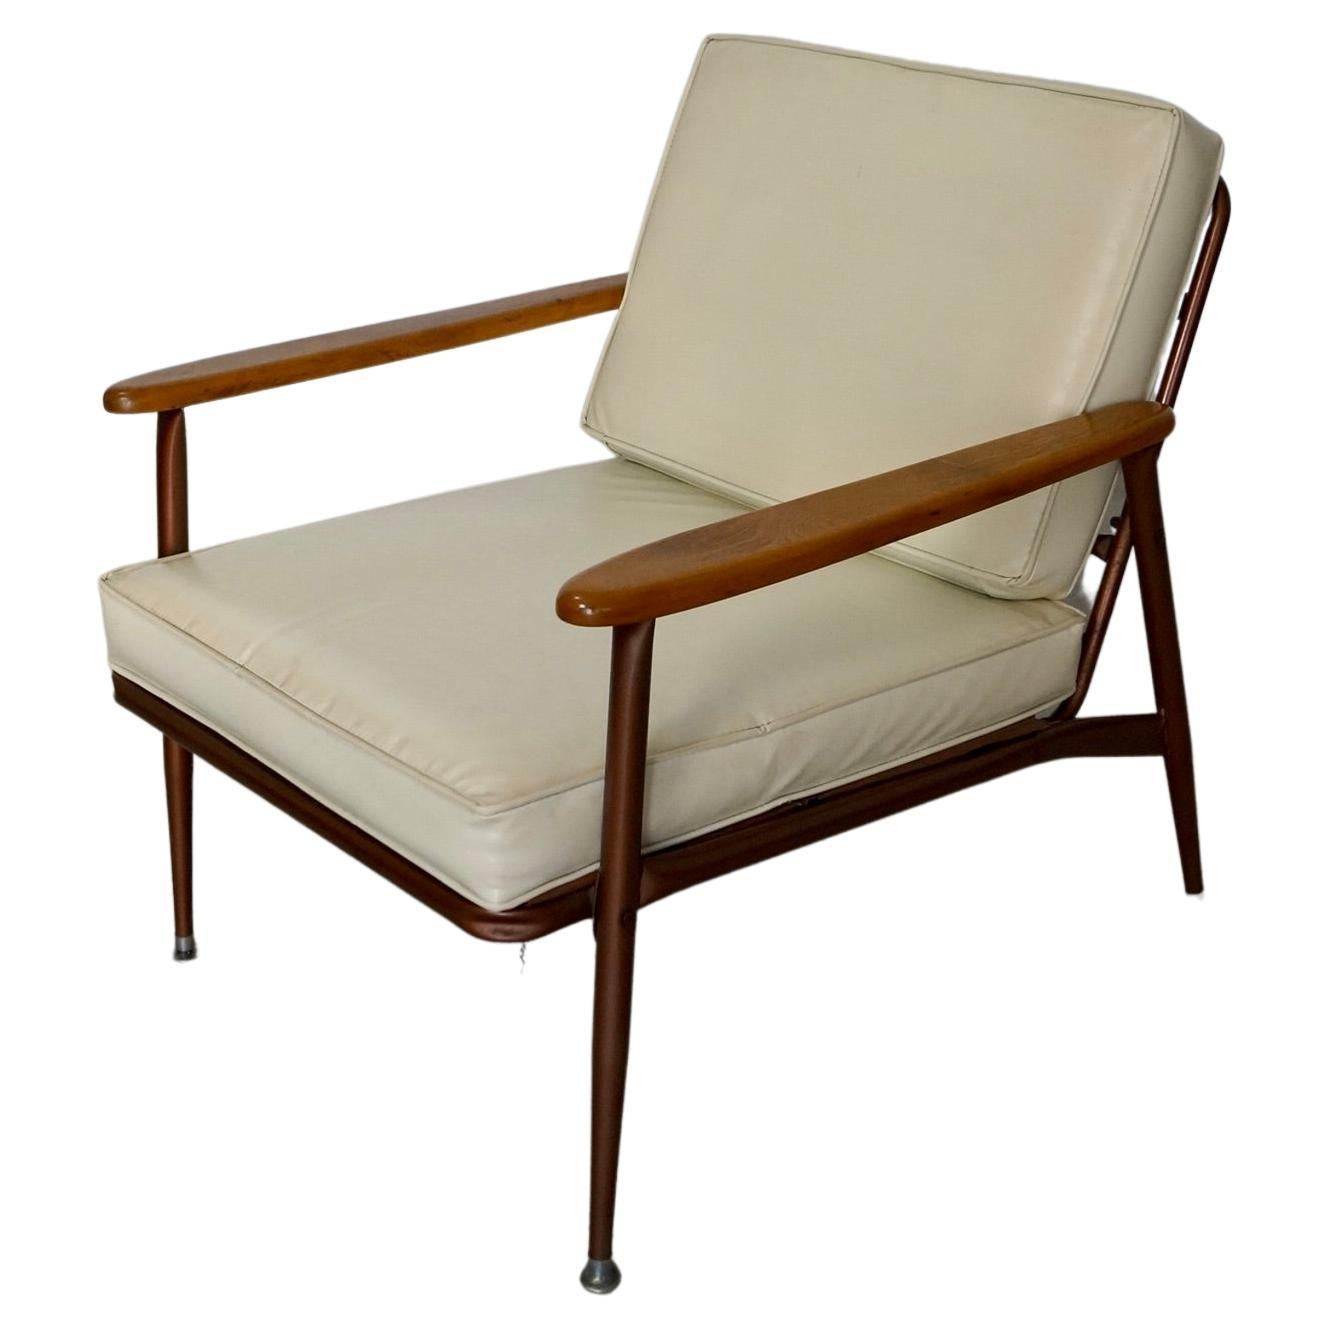 1950's Mid-Century Modern Baumritter Lounge Chair For Sale